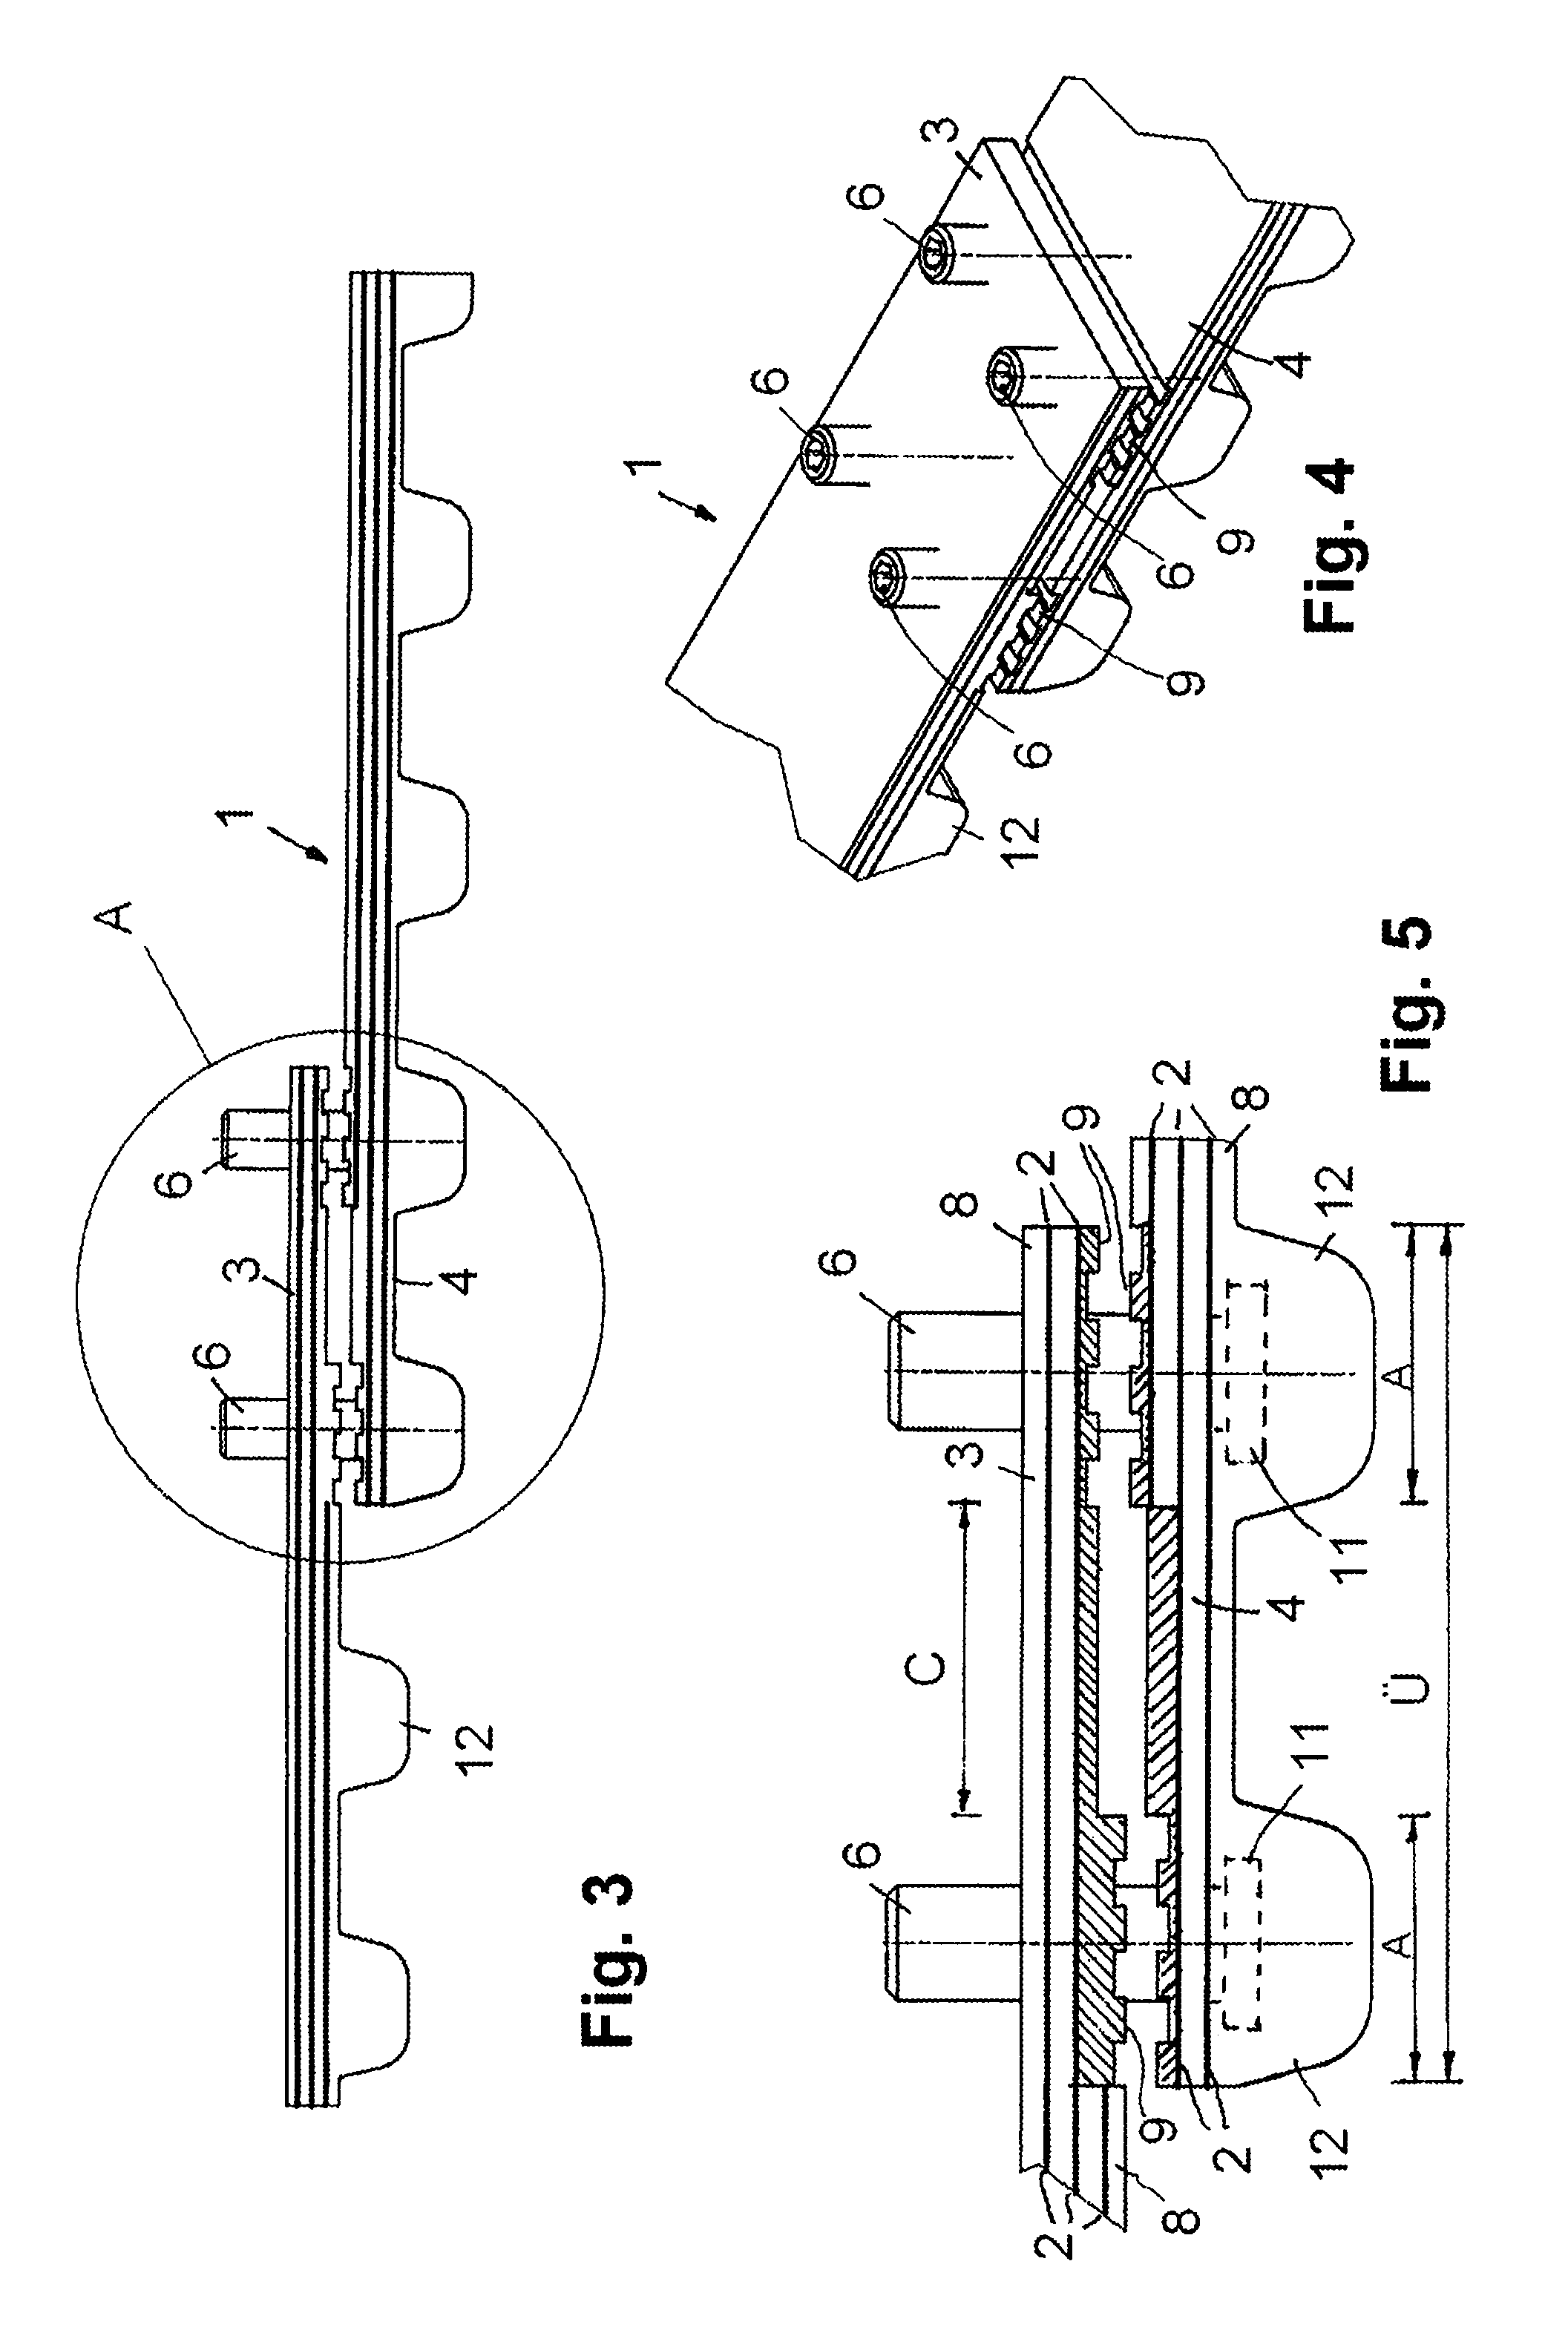 Belt as a traction mechanism for belt conveyors of agricultural machines